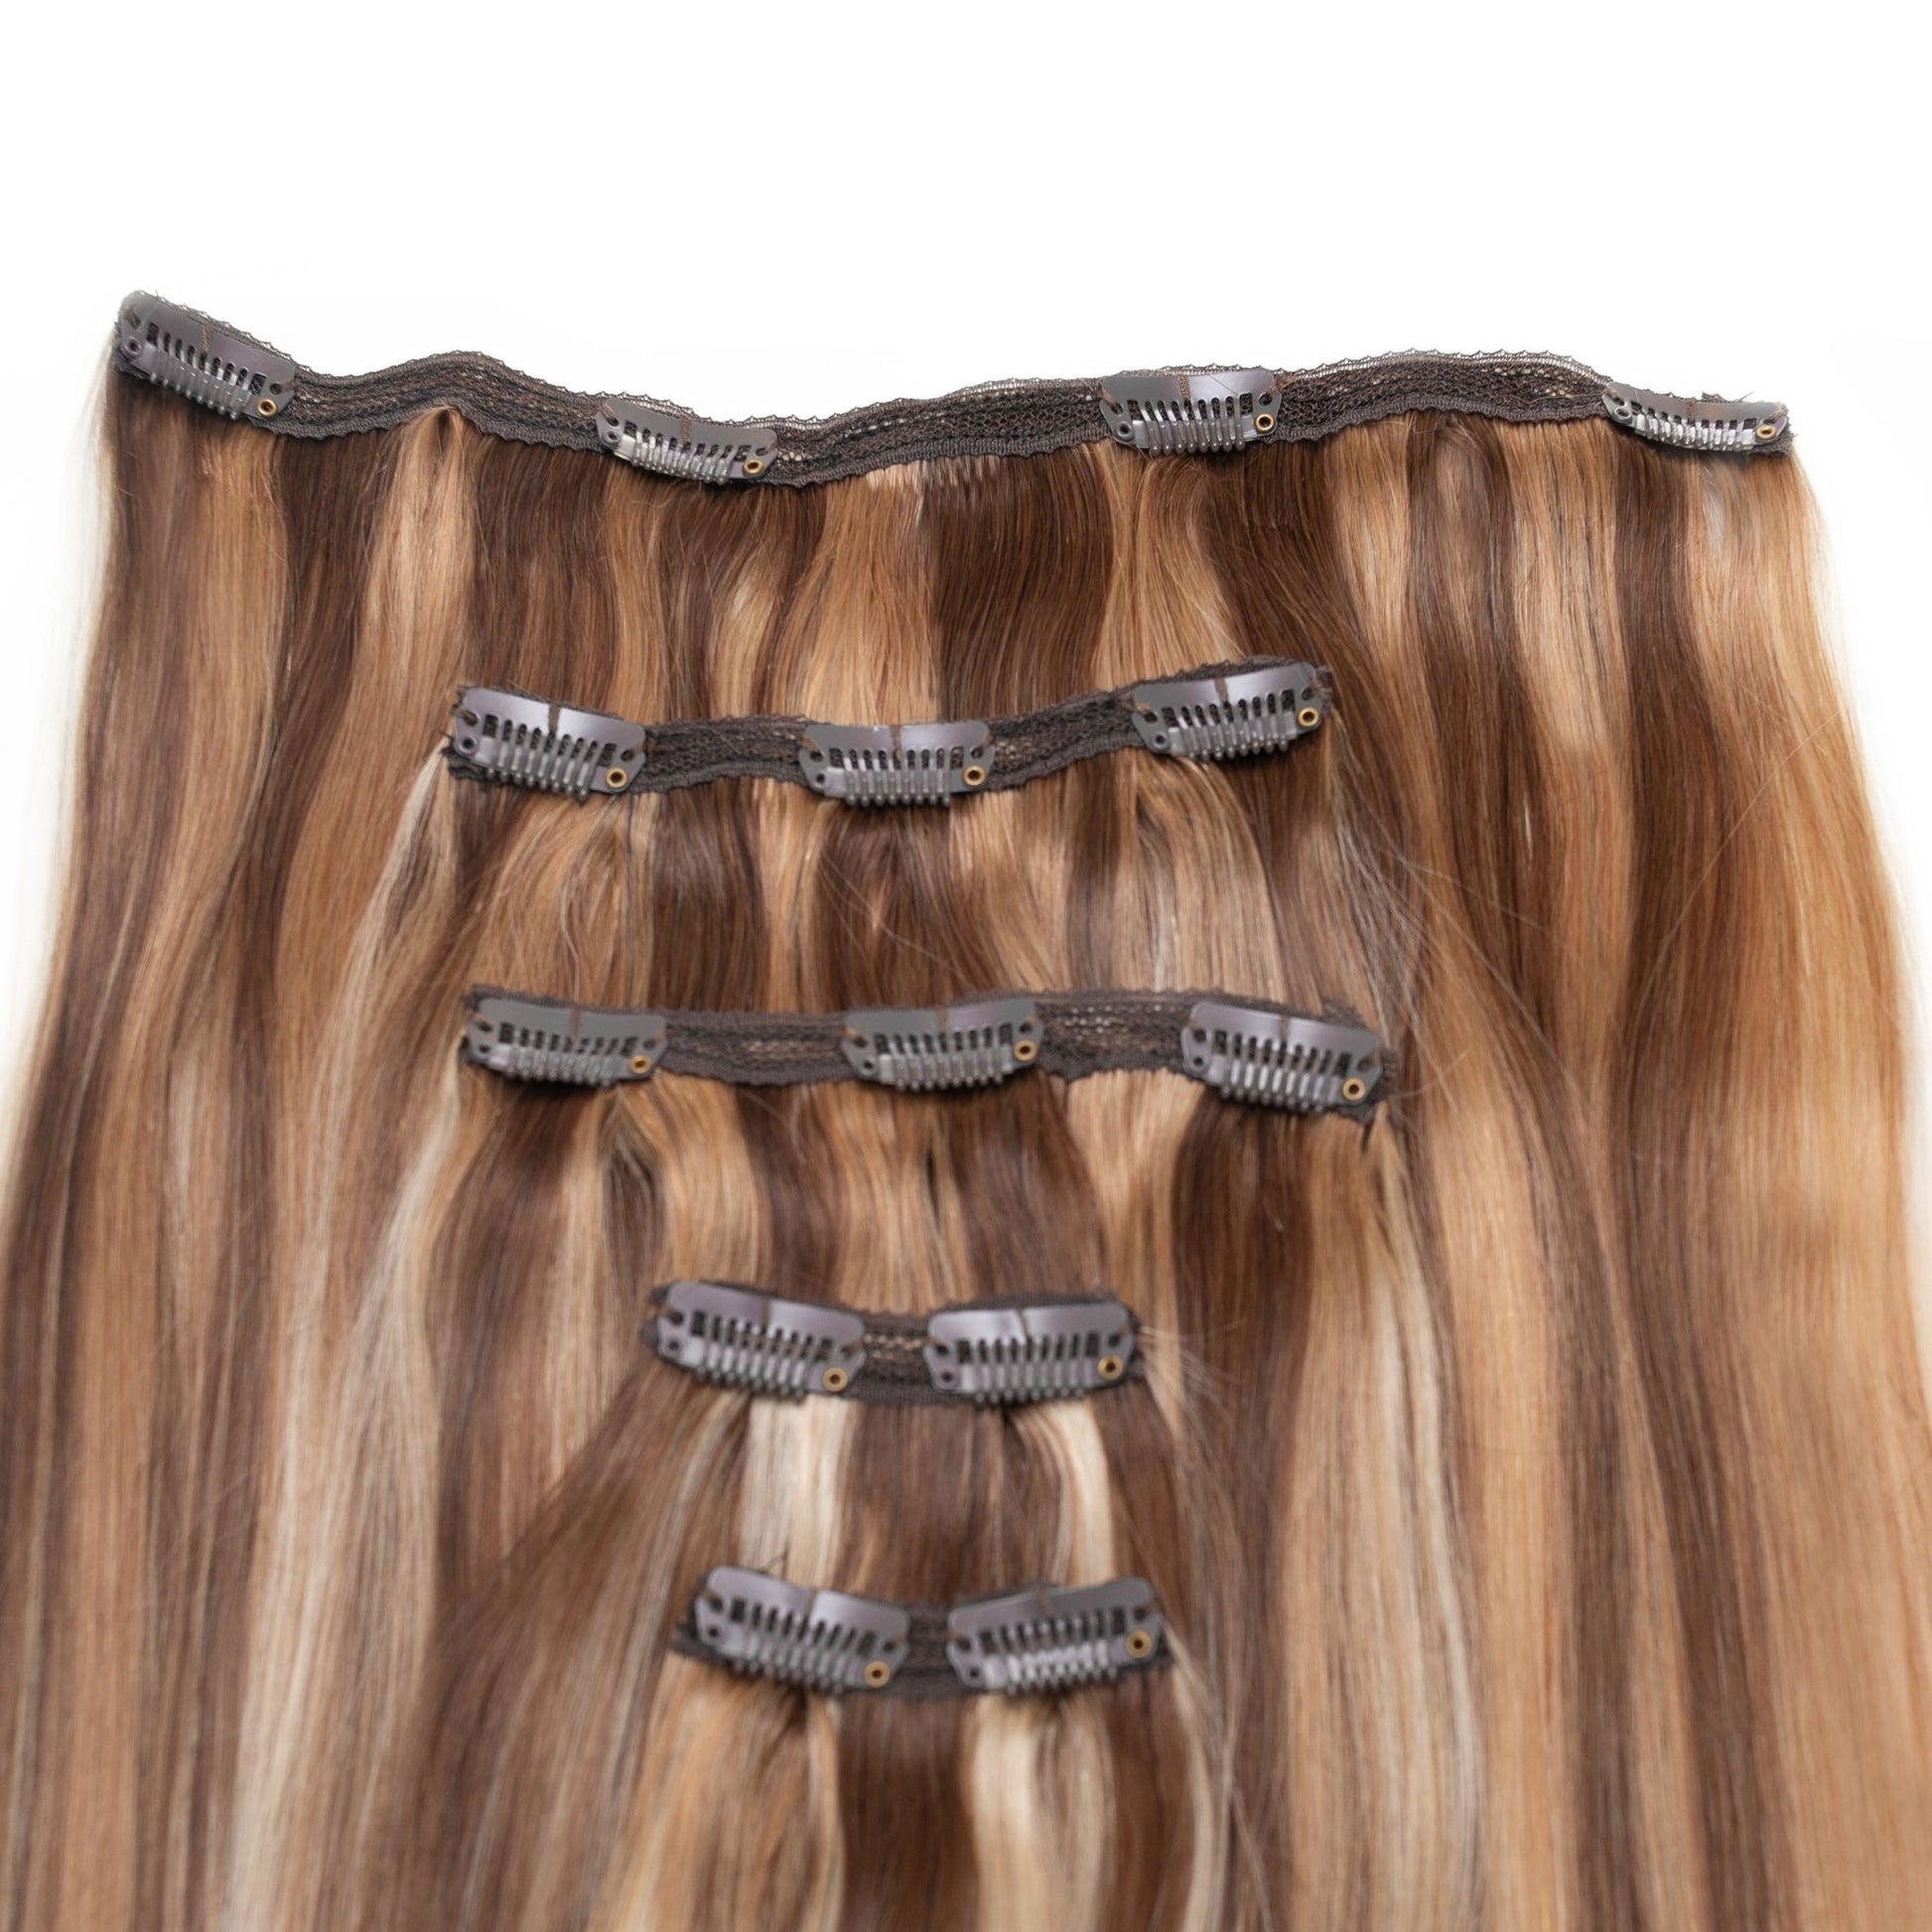 Seamless1 Mocha Human Hair in 5 Piece - shelley and co